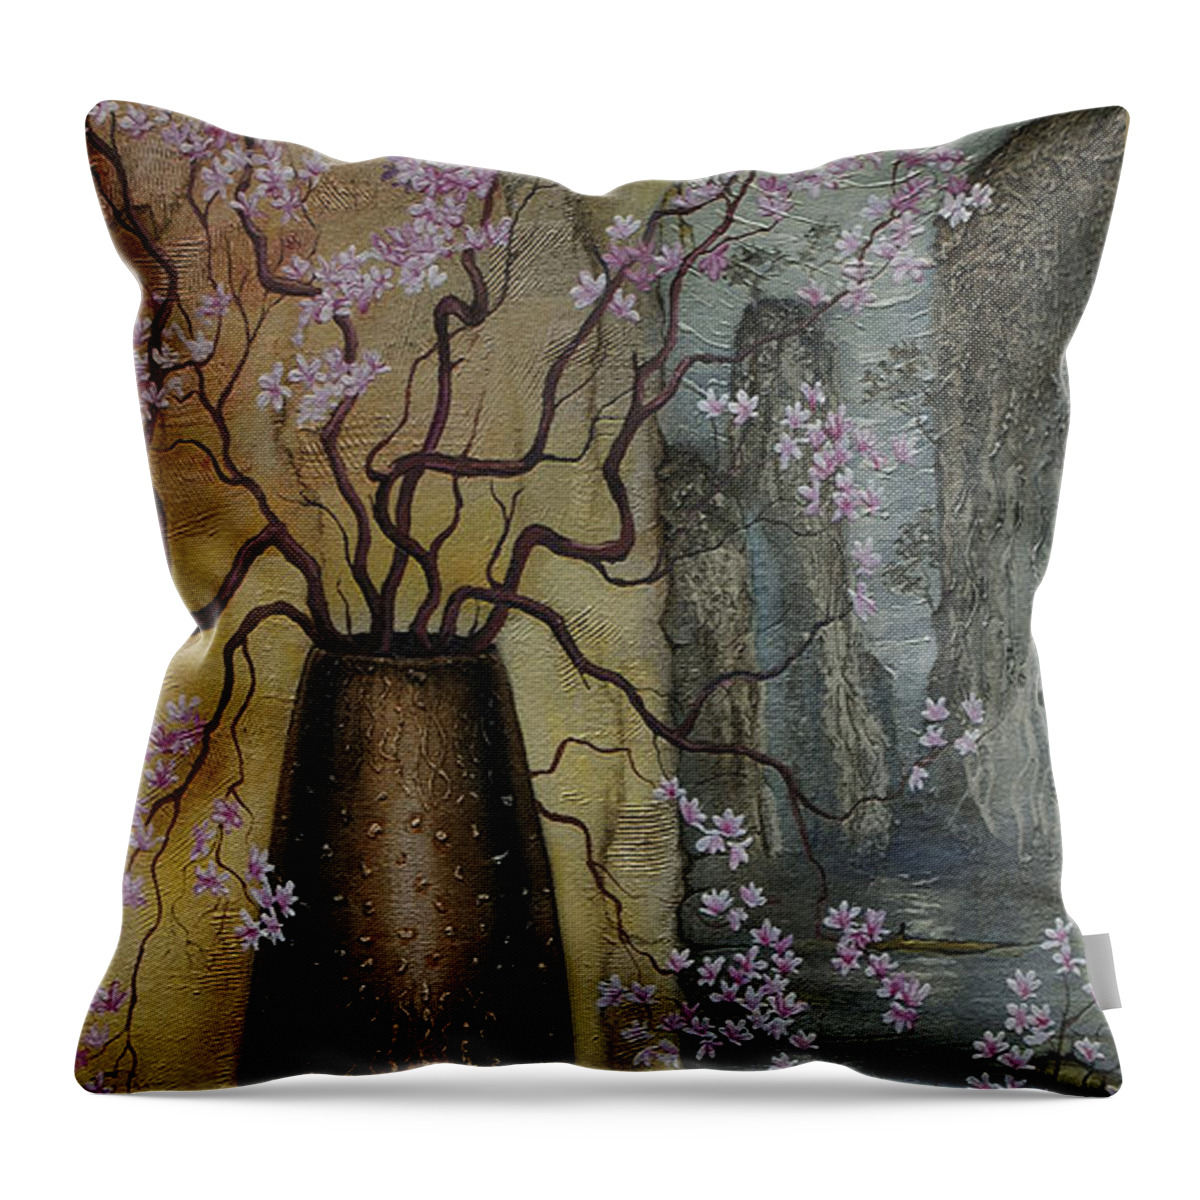 Still Life Throw Pillow featuring the painting Blossom by Vrindavan Das